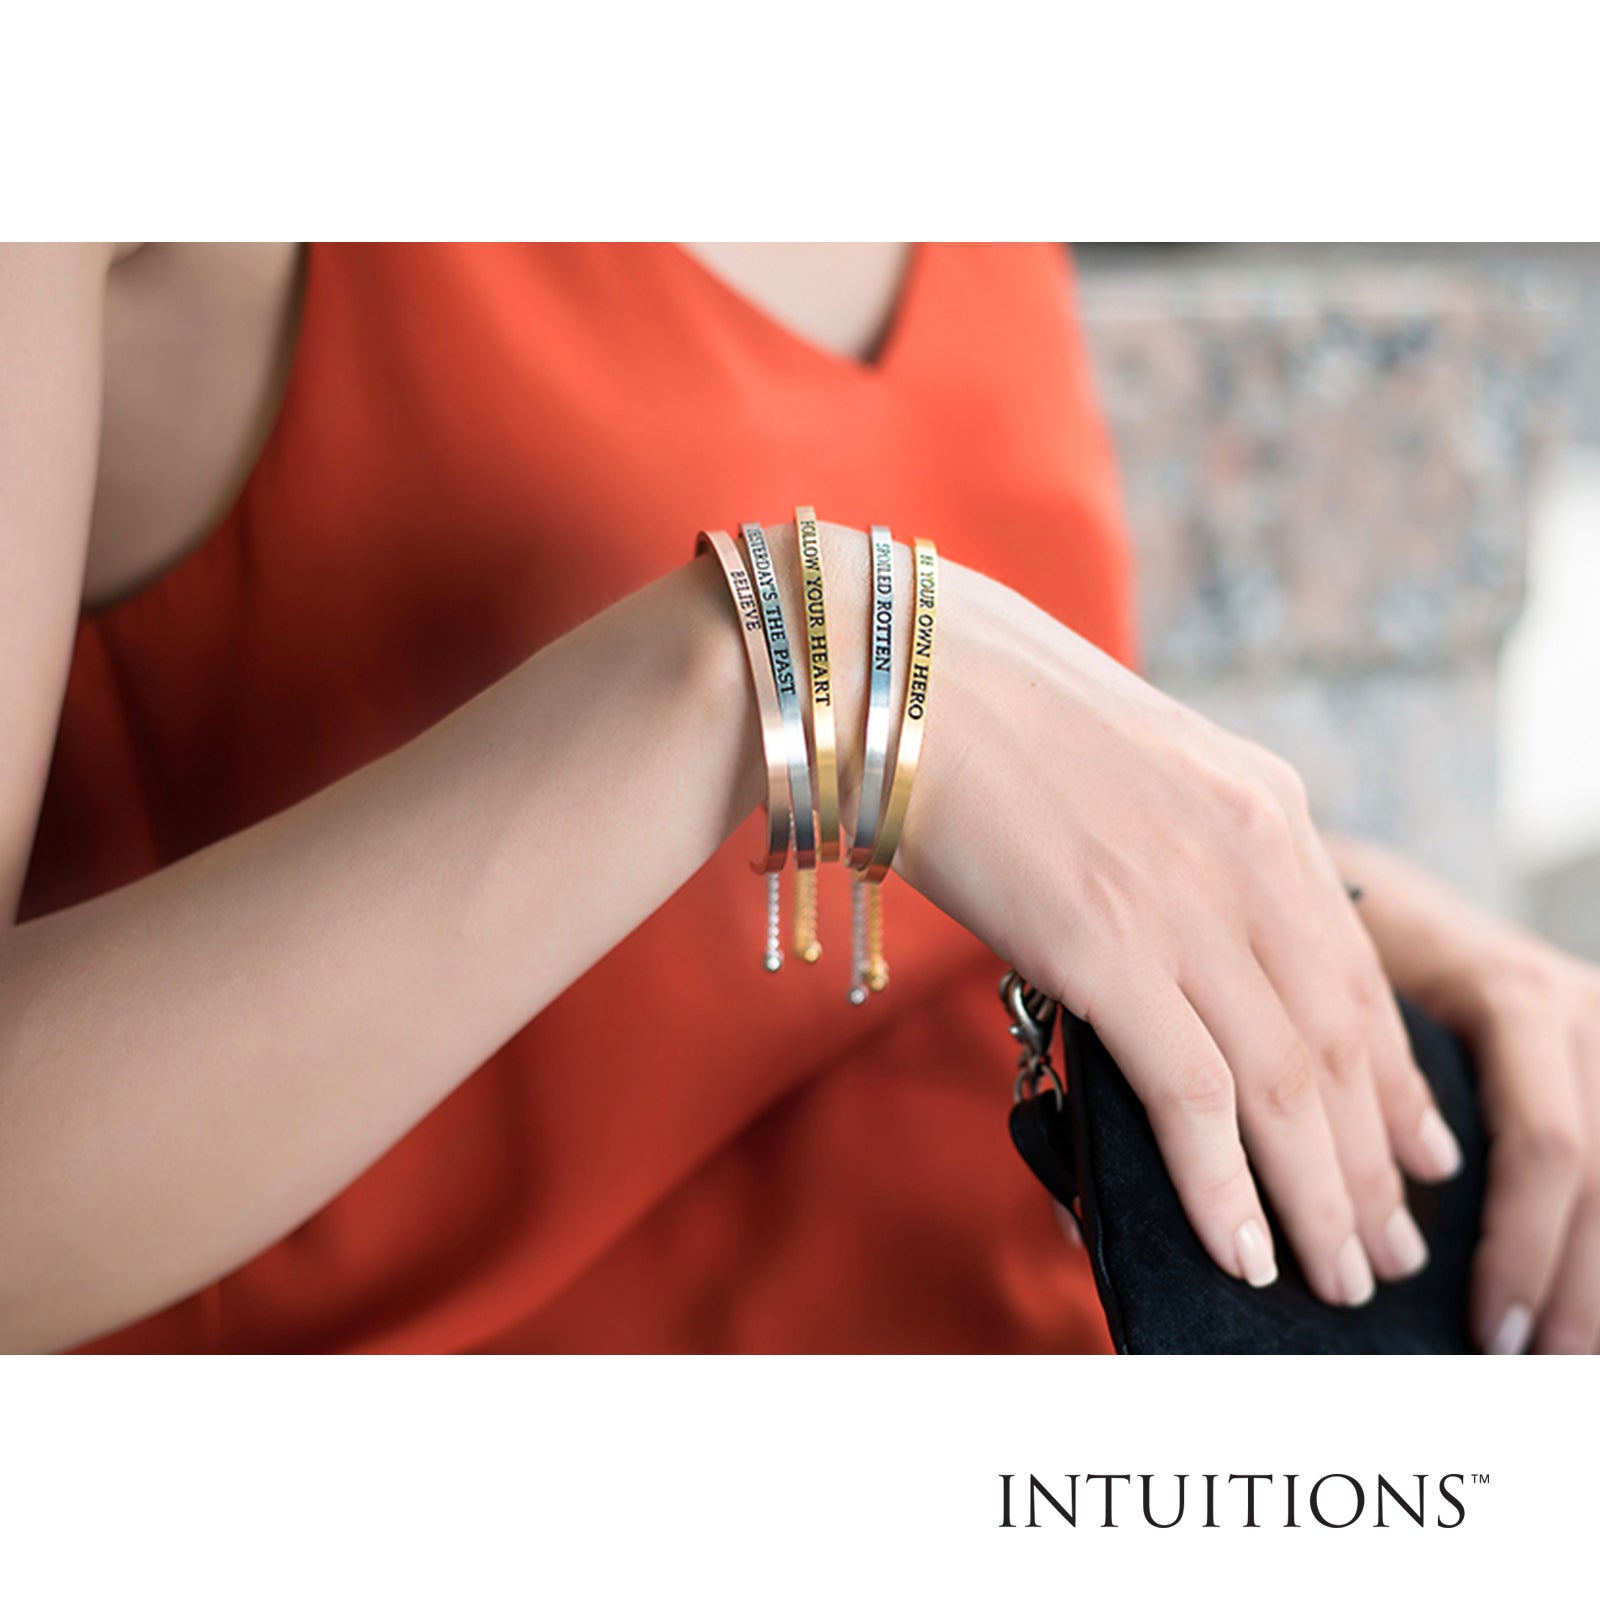 Intuitions Stainless Steel DON’T LOOK BACK Diamond Accent Cuff Bangle Bracelet fine designer jewelry for men and women